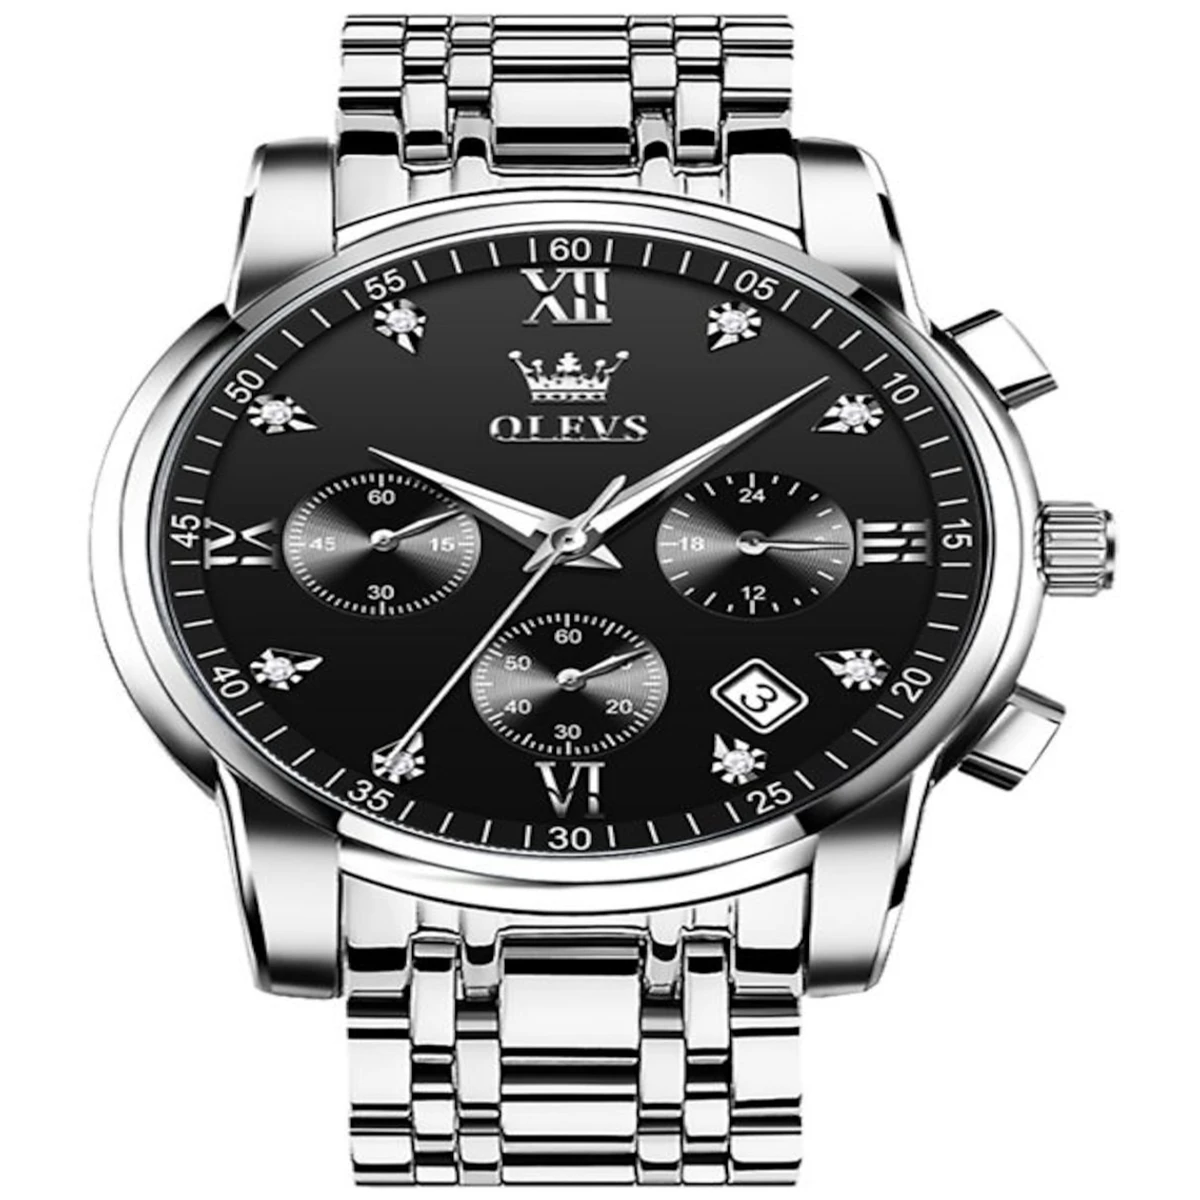 OLEVS MODEL 2858 Watch for Men Stainless Steel Watches - 2858 Silver chain  Dial Black  Cooler  - MAN WATCH